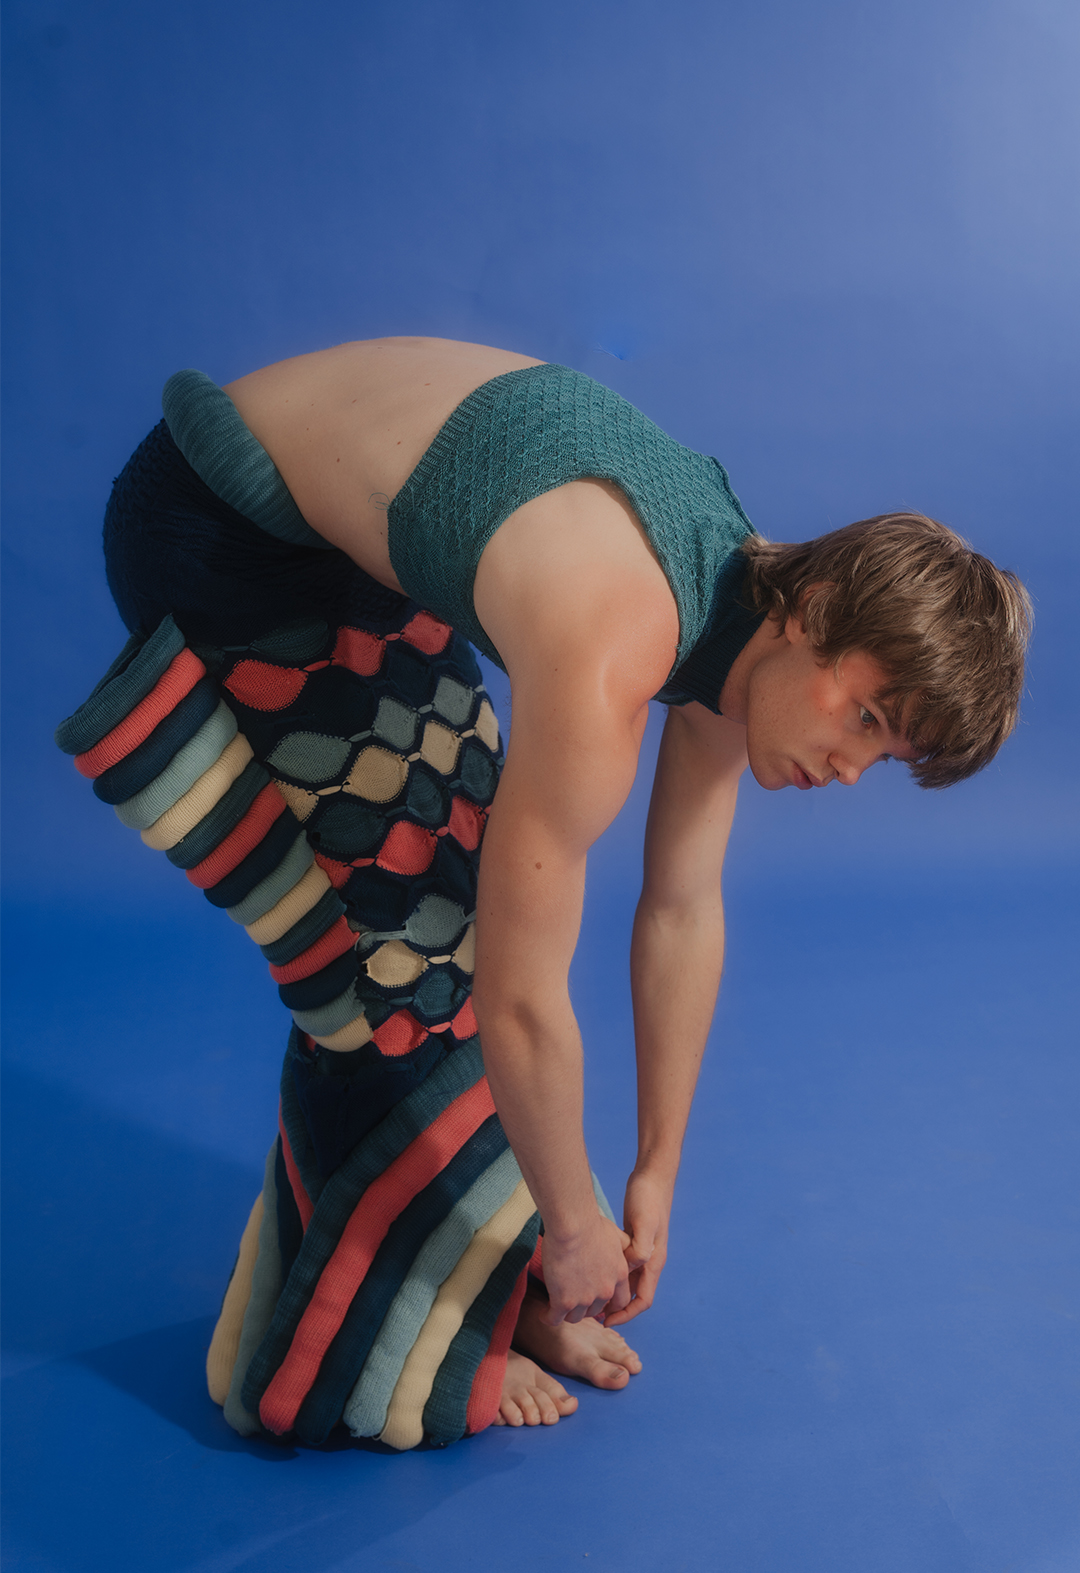 The photo shows a close-up shot of the model in a bent-over pose, wearing a sculptural knit skirt and tank top.